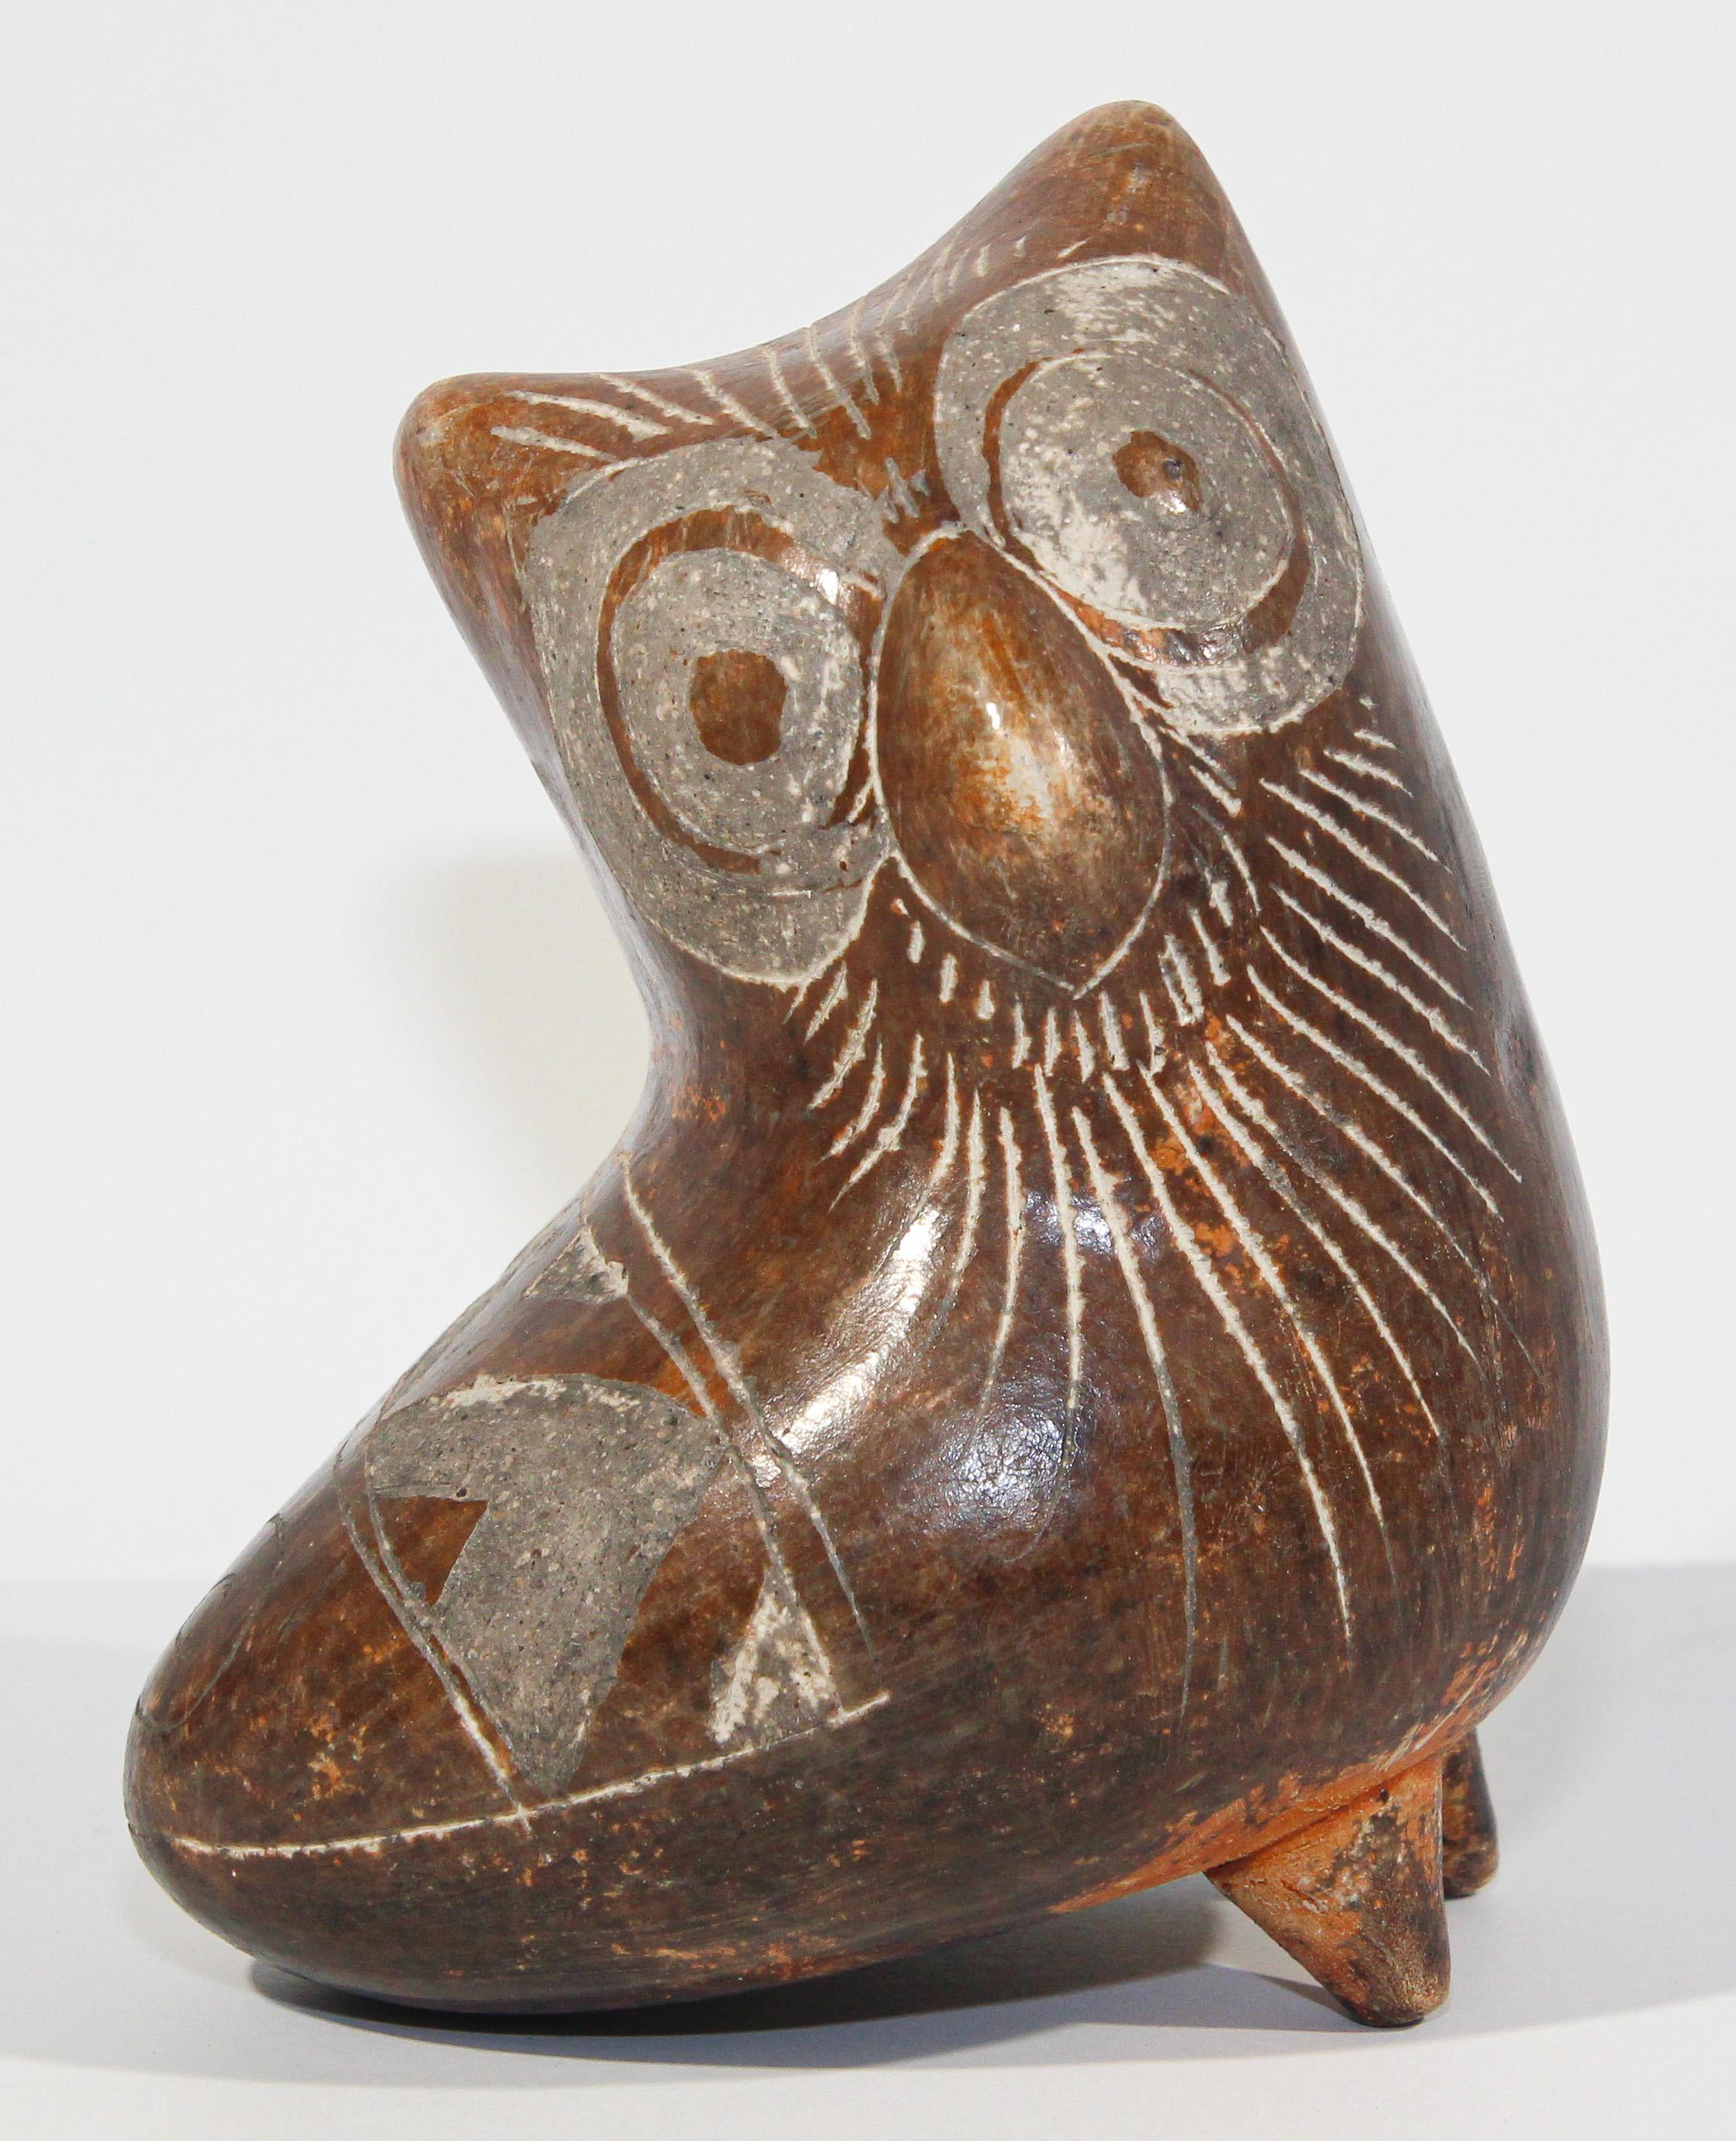 Vintage Peruvian pottery hand crafted owl sculpture.
Beautiful vintage Peru Michu style hand made and hand carved Art Pottery.
Decorative Collectible Peruvian Folk Art stoneware bird.
South American bird ceramic sculpture hand crafted with warm